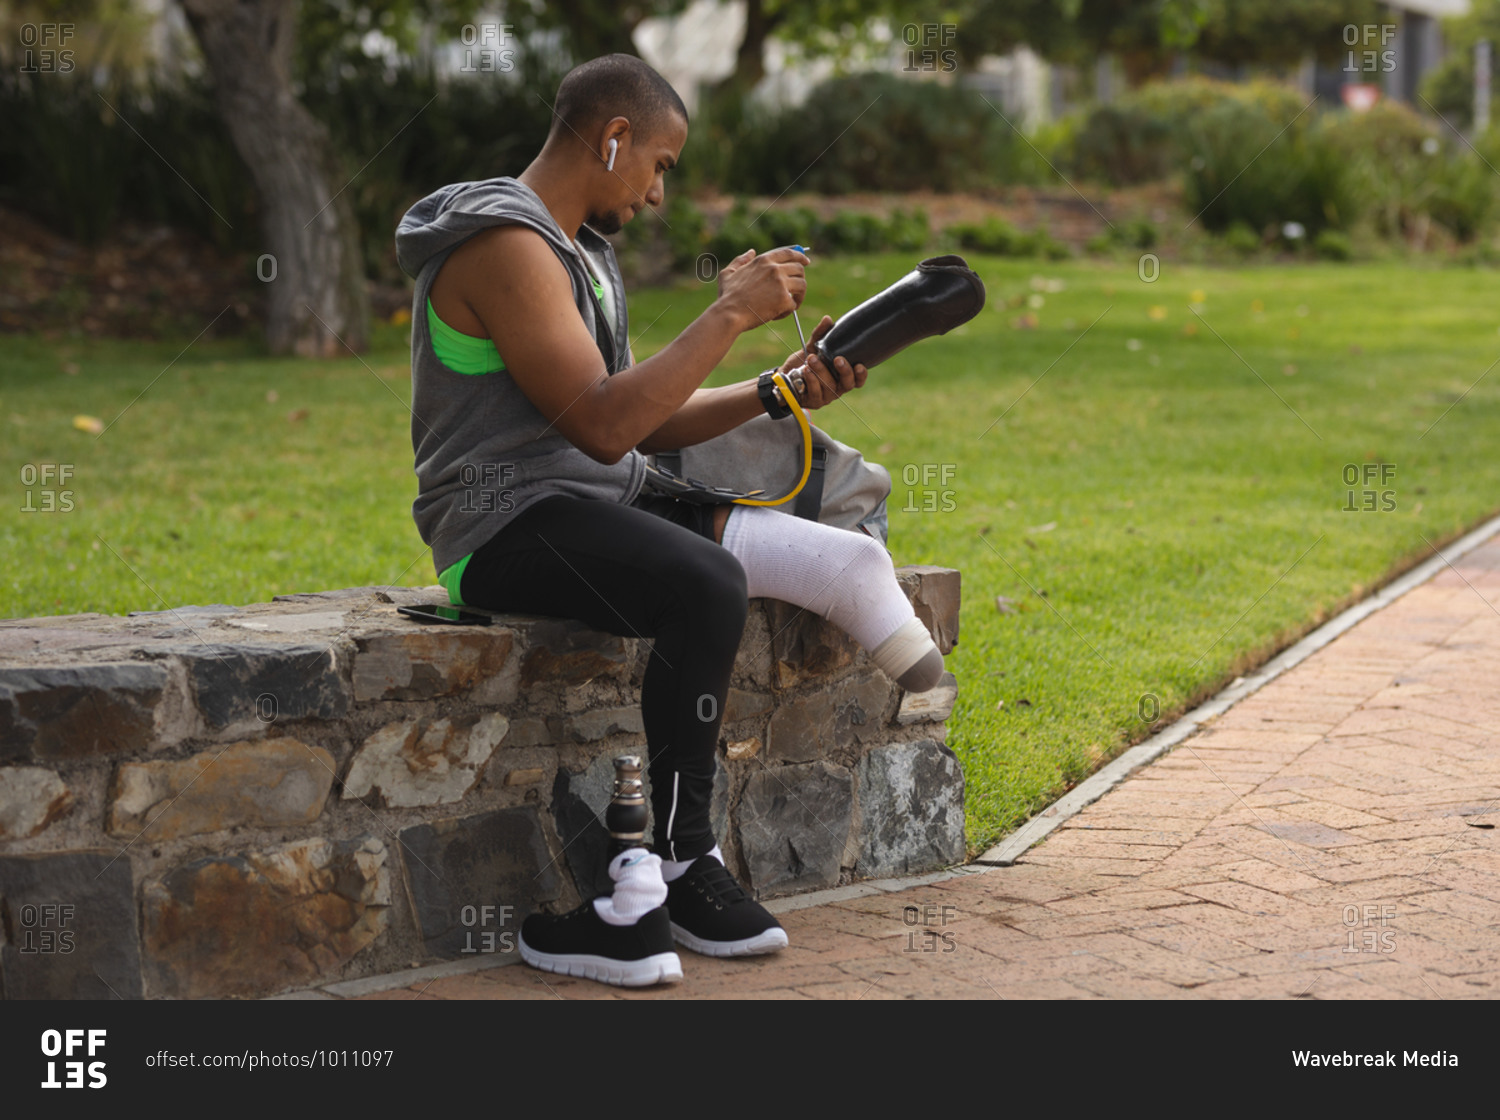 Disabled mixed race man with a prosthetic leg, working out in an urban park, sitting on a wall by a path making adjustments to his prosthetic leg. Fitness disability healthy lifestyle.